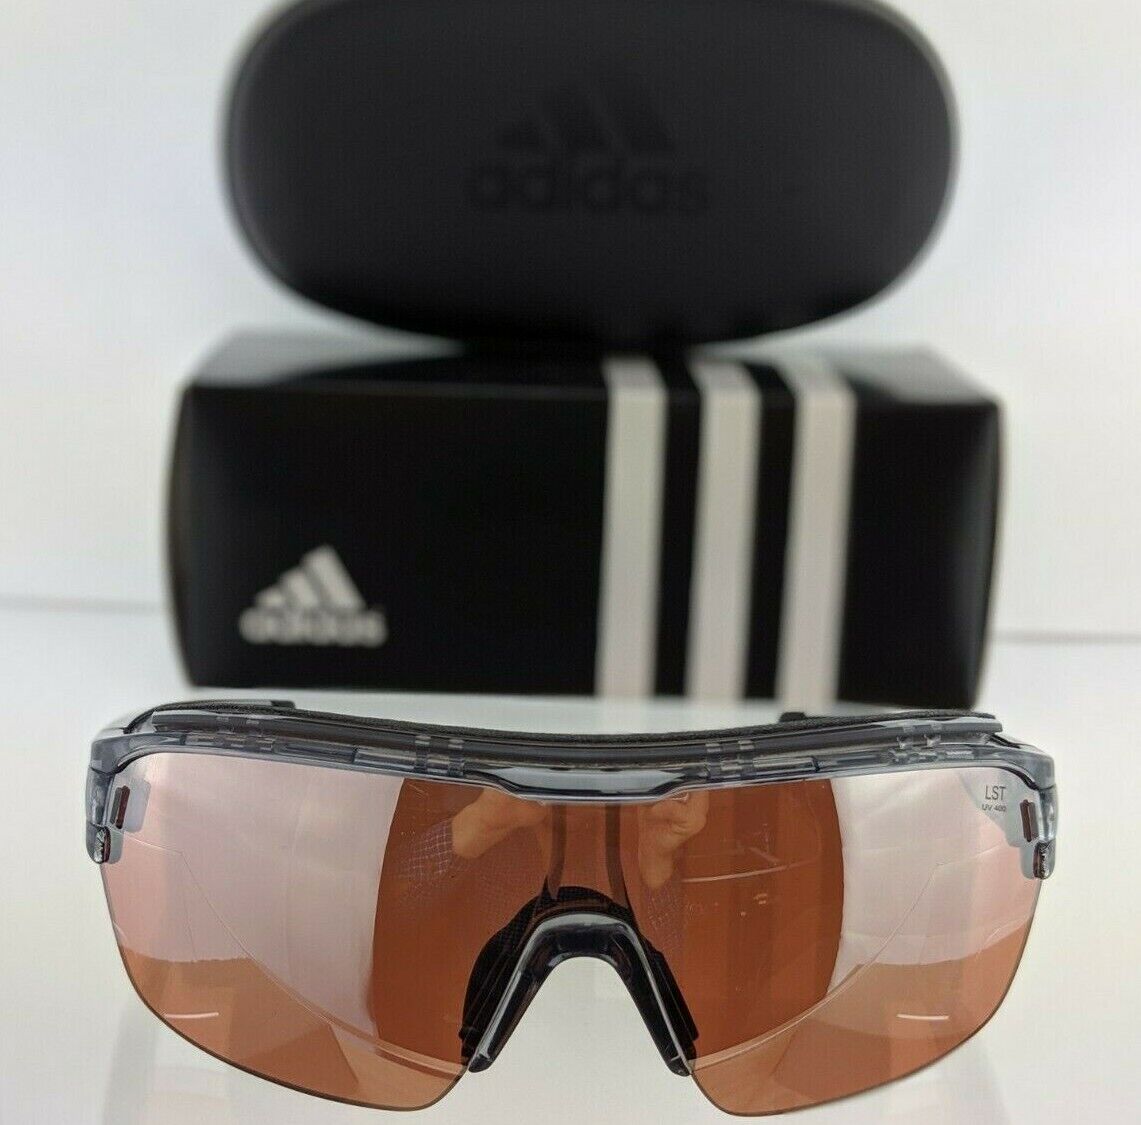 Brand New Authentic Adidas Sunglasses AD 05 75 6600 Zonyk Pro ad05 Sports Frame